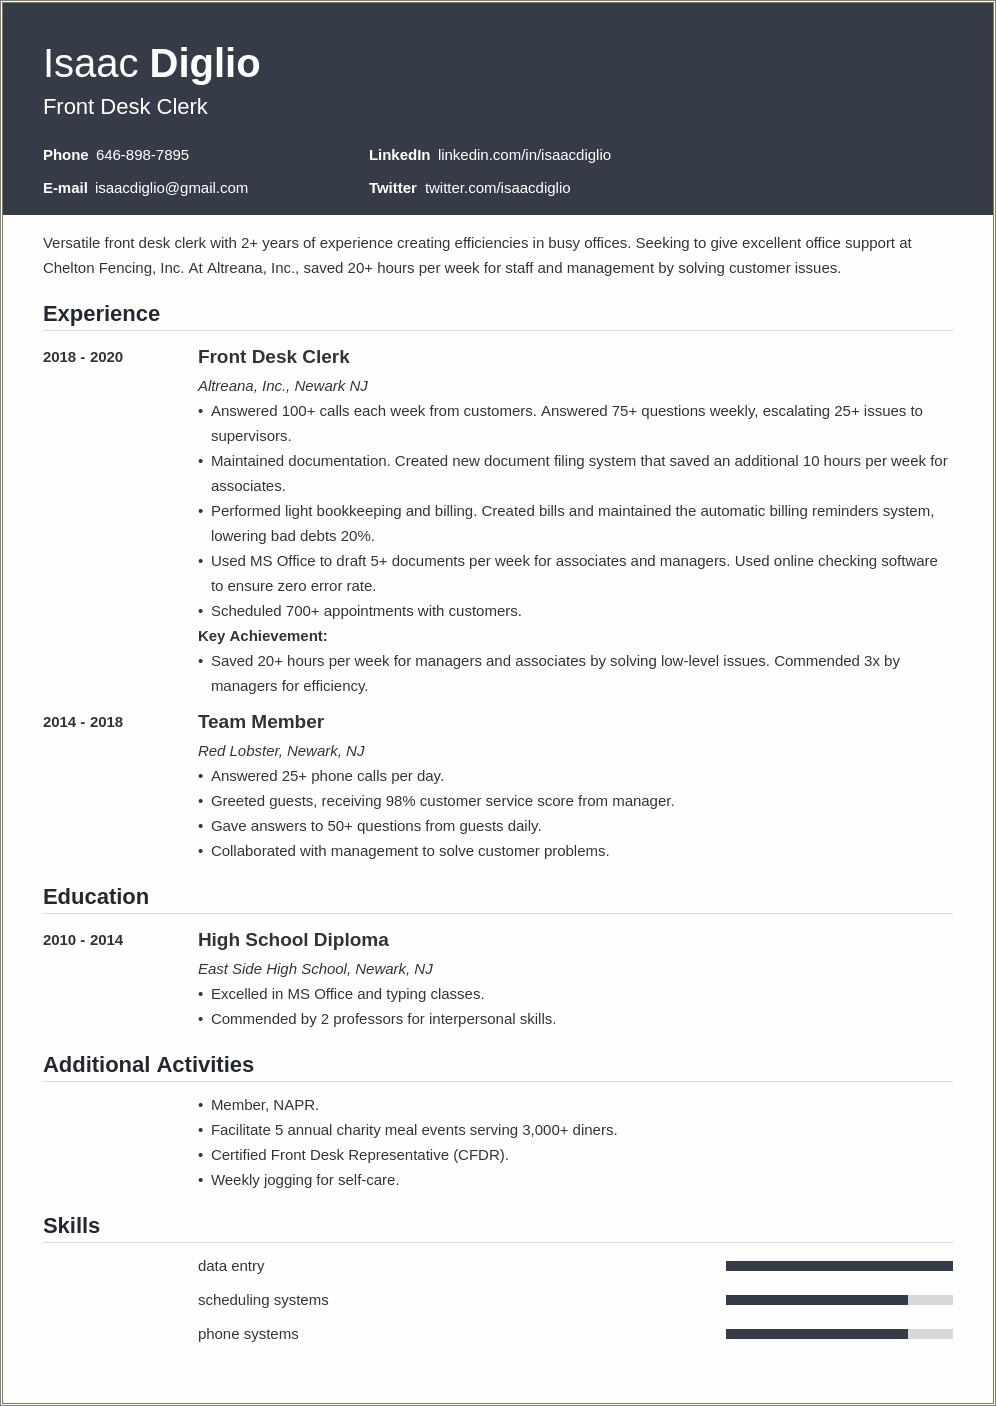 Resume Summary For Entry Level Front Desk